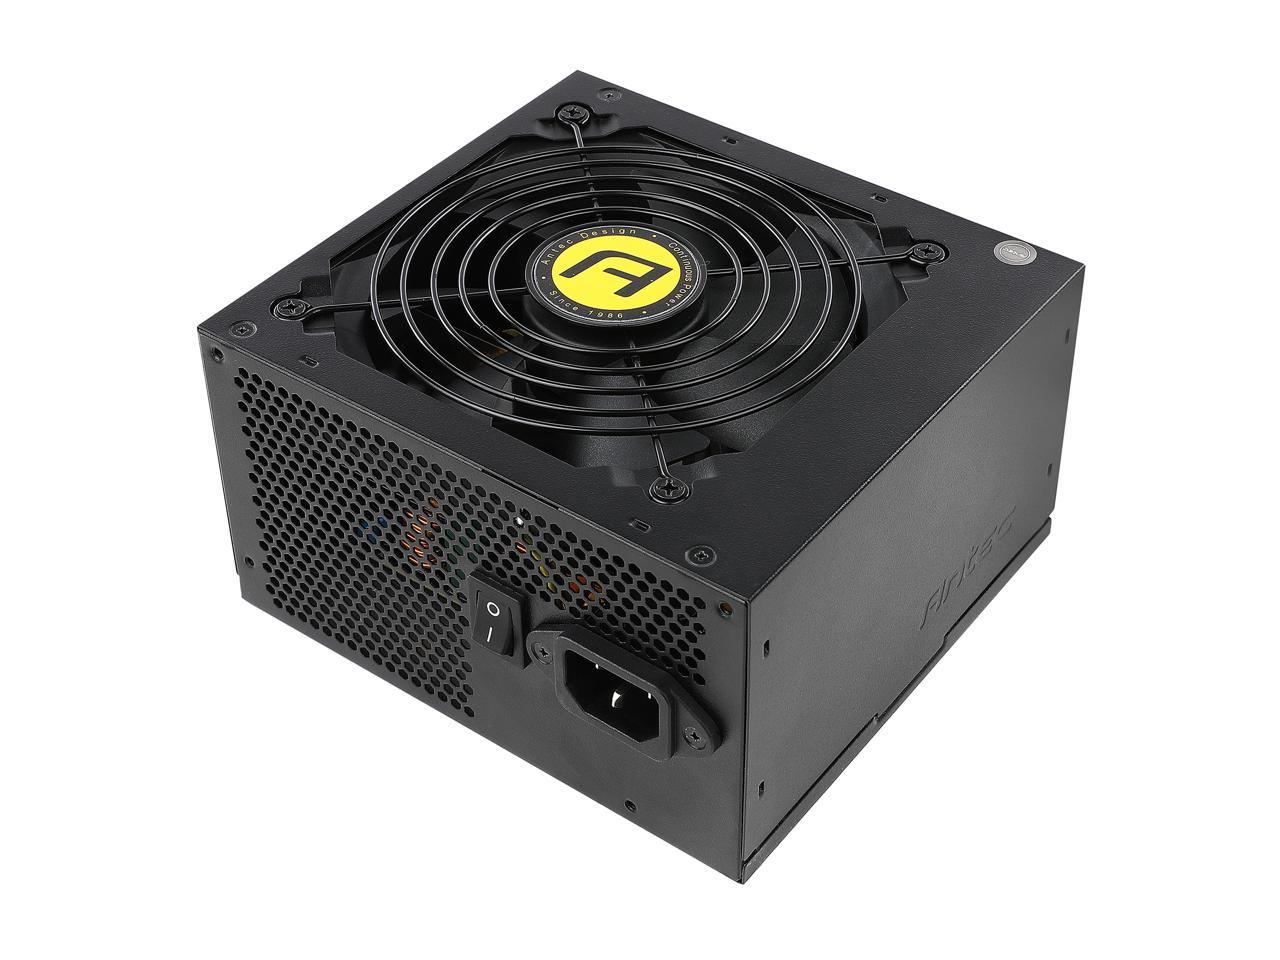 Antec Neoeco Classic Ne550c V2 550w 80 Plus Bronze Certified Japanese Heavy Duty Caps 120 Mm High Quality Fan Thermal Manager 5 Year Warranty Newegg Com